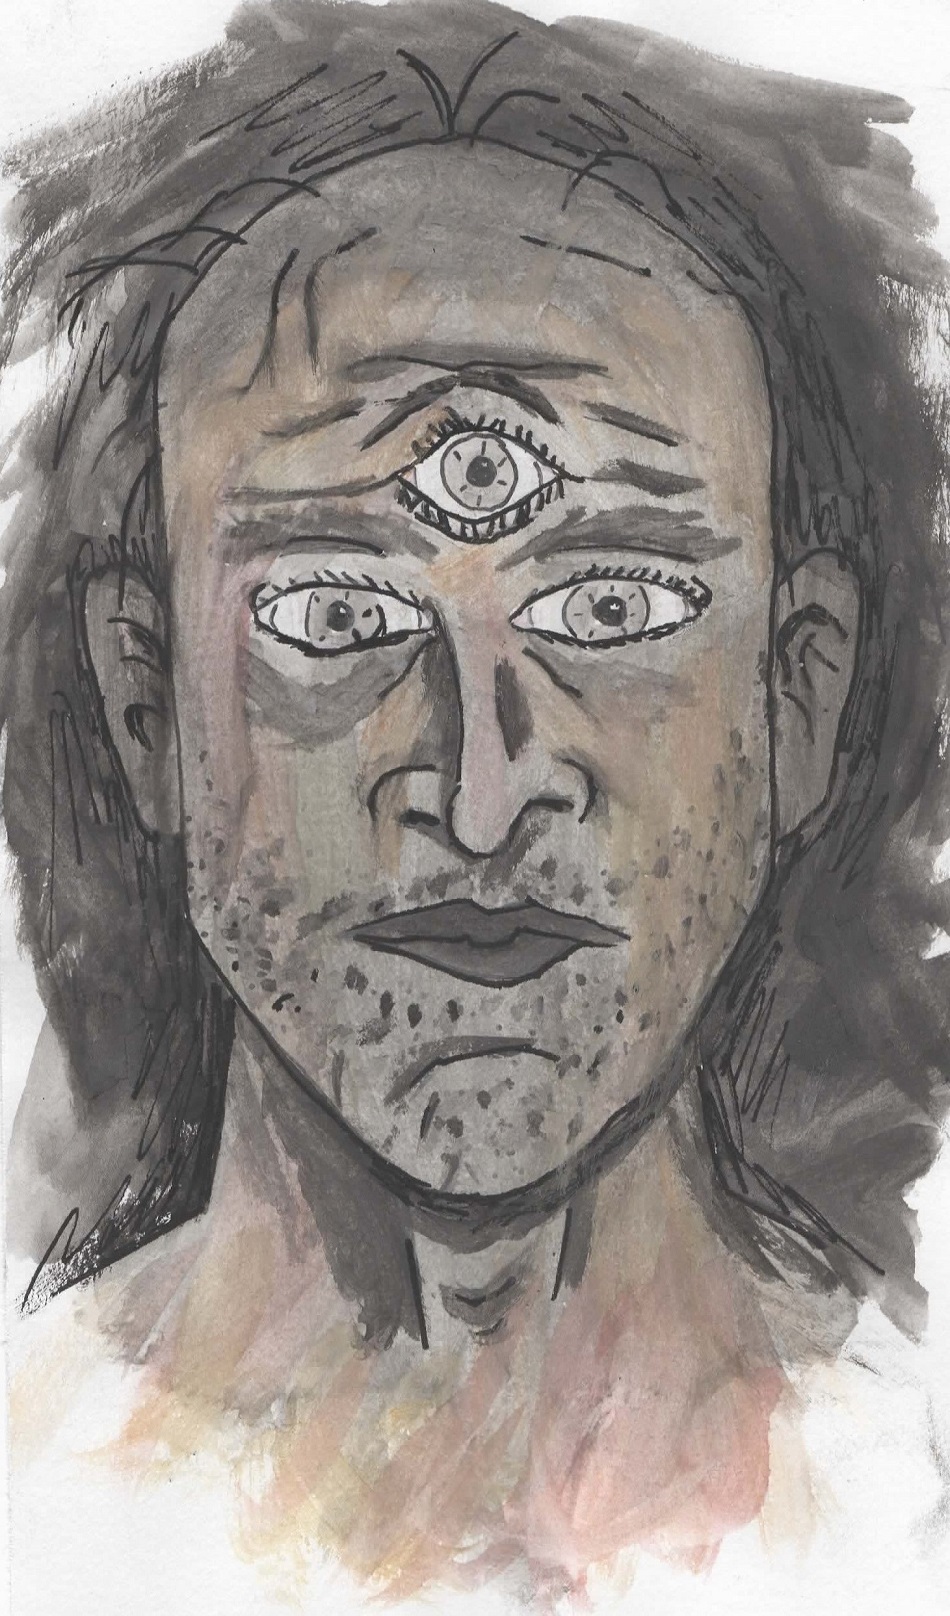 A depiction of the Third Eye Man